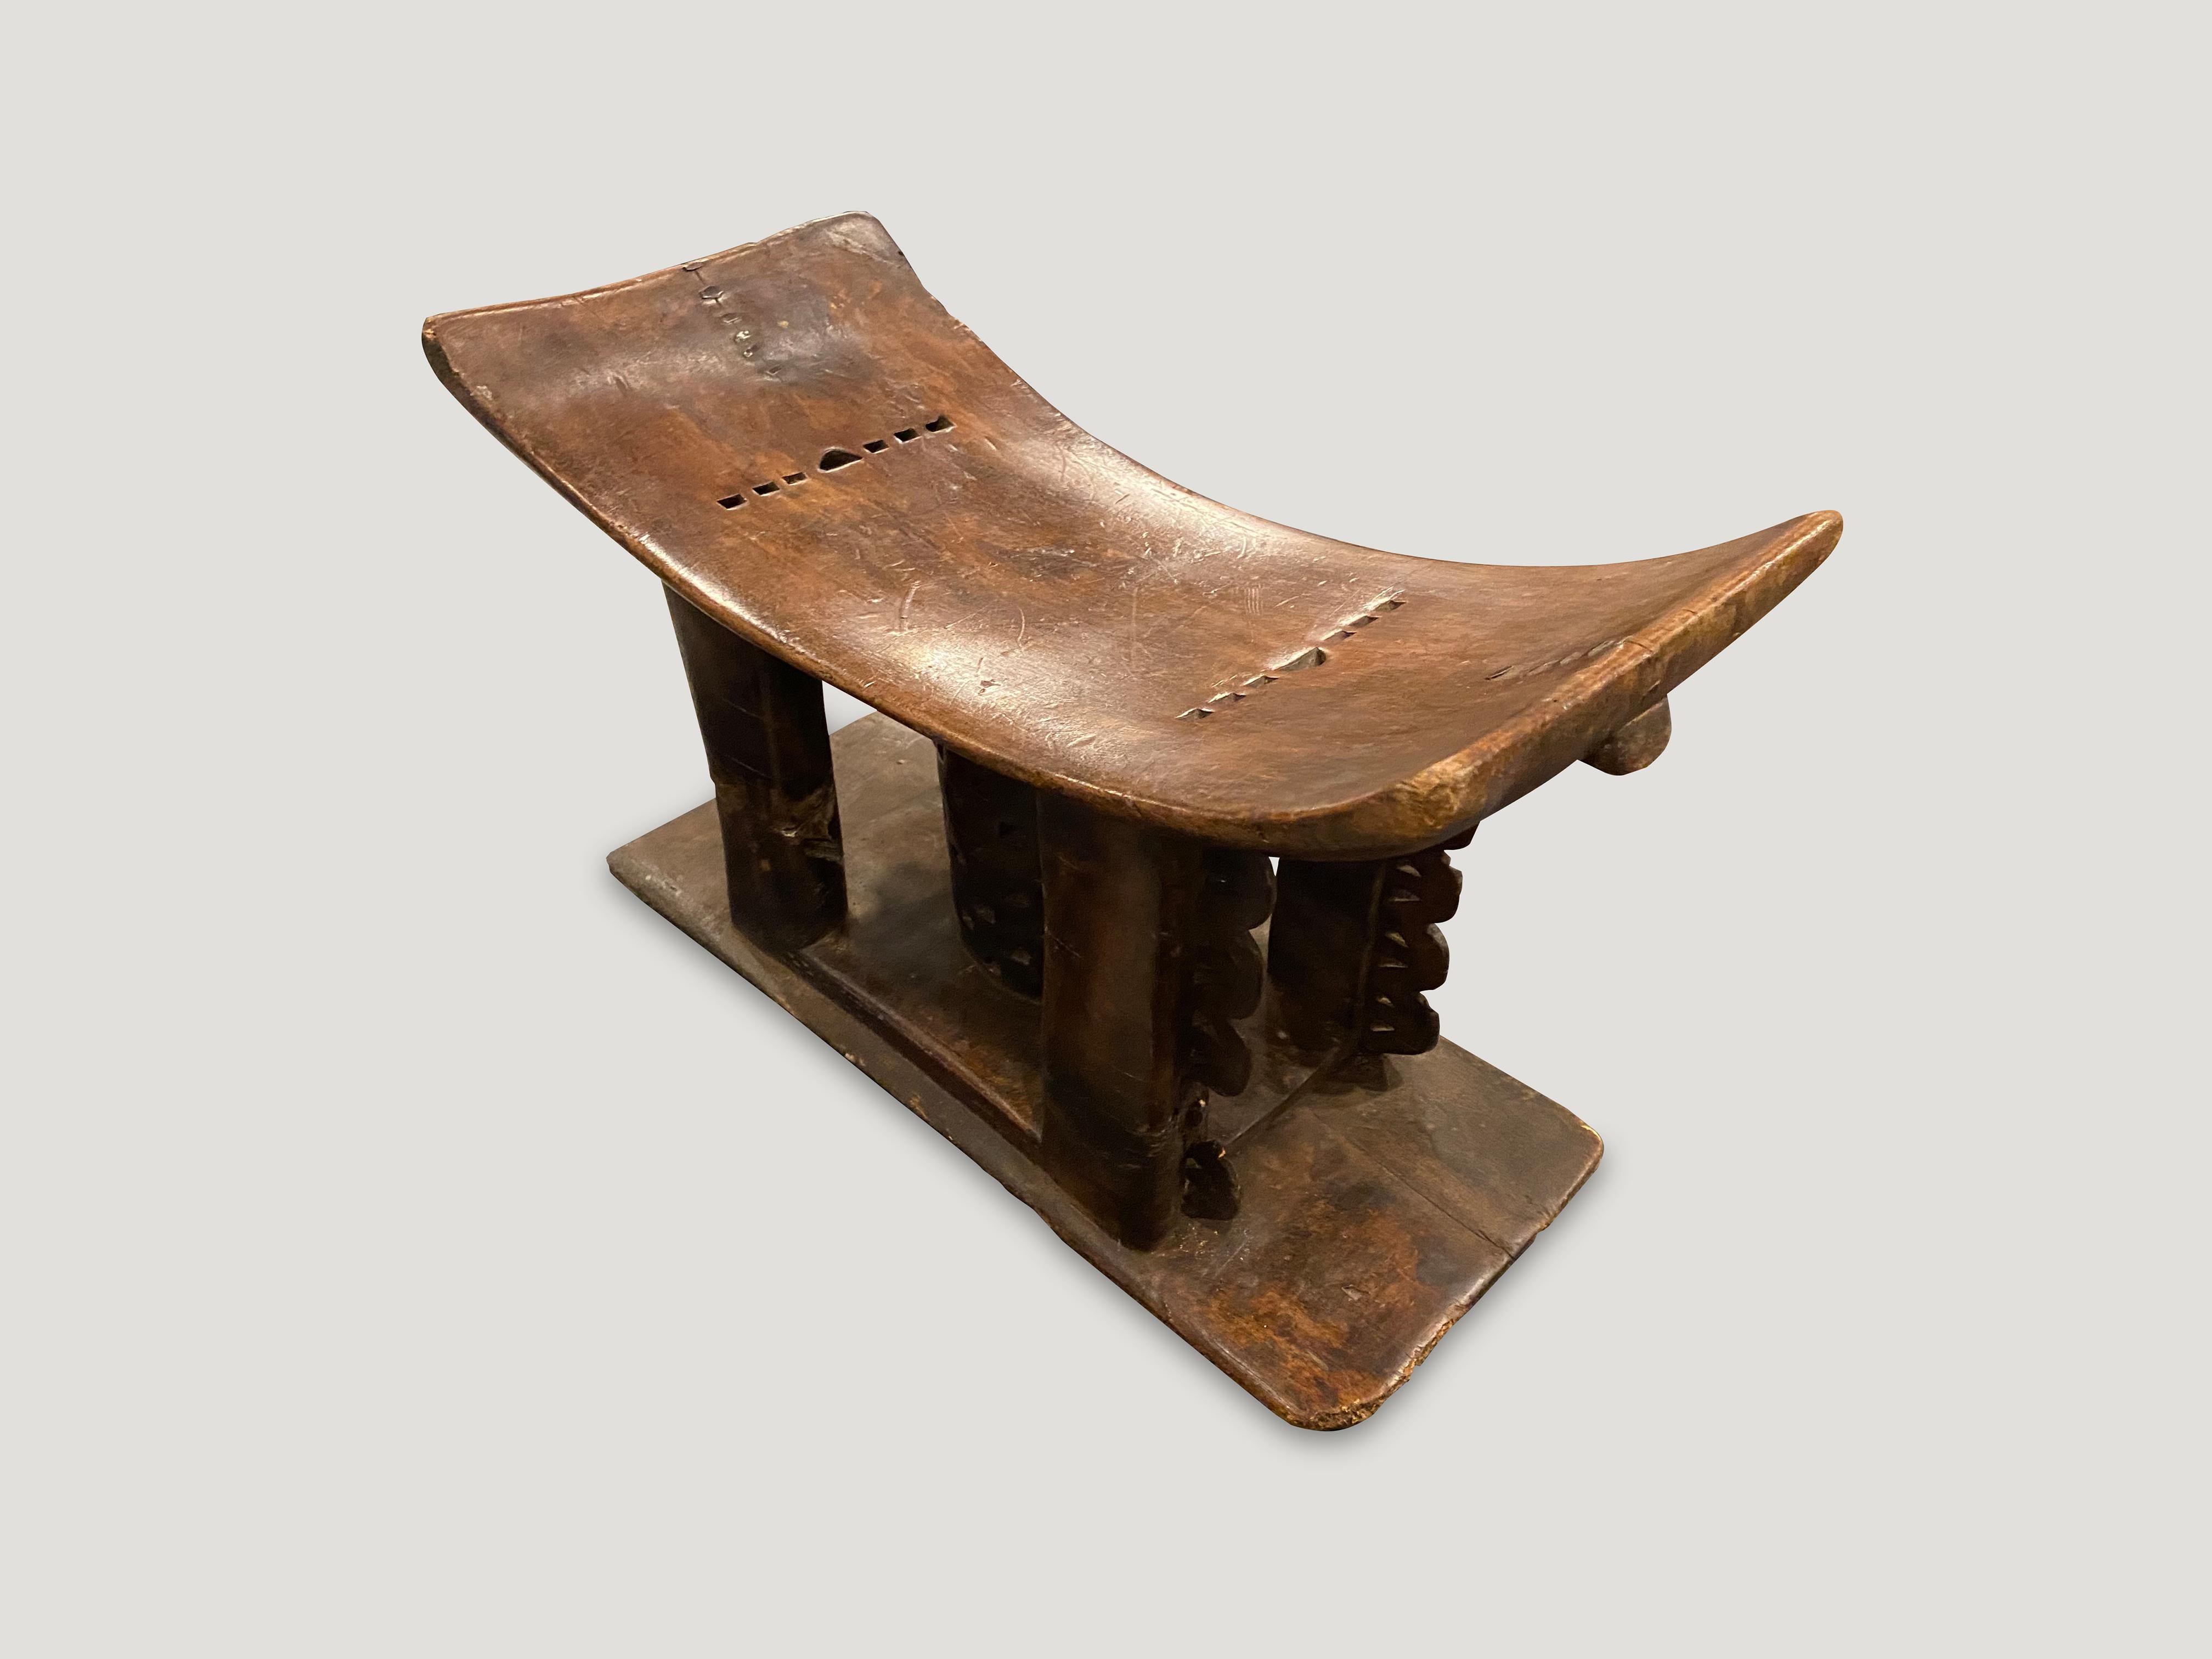 Lovely patina on this antique Ashanti bench or stool, hand carved from a single piece of wood from West Africa, early 20th century. The seat is 8” high and the sides 11” high.

This bench was sourced in the spirit of wabi-sabi, a Japanese